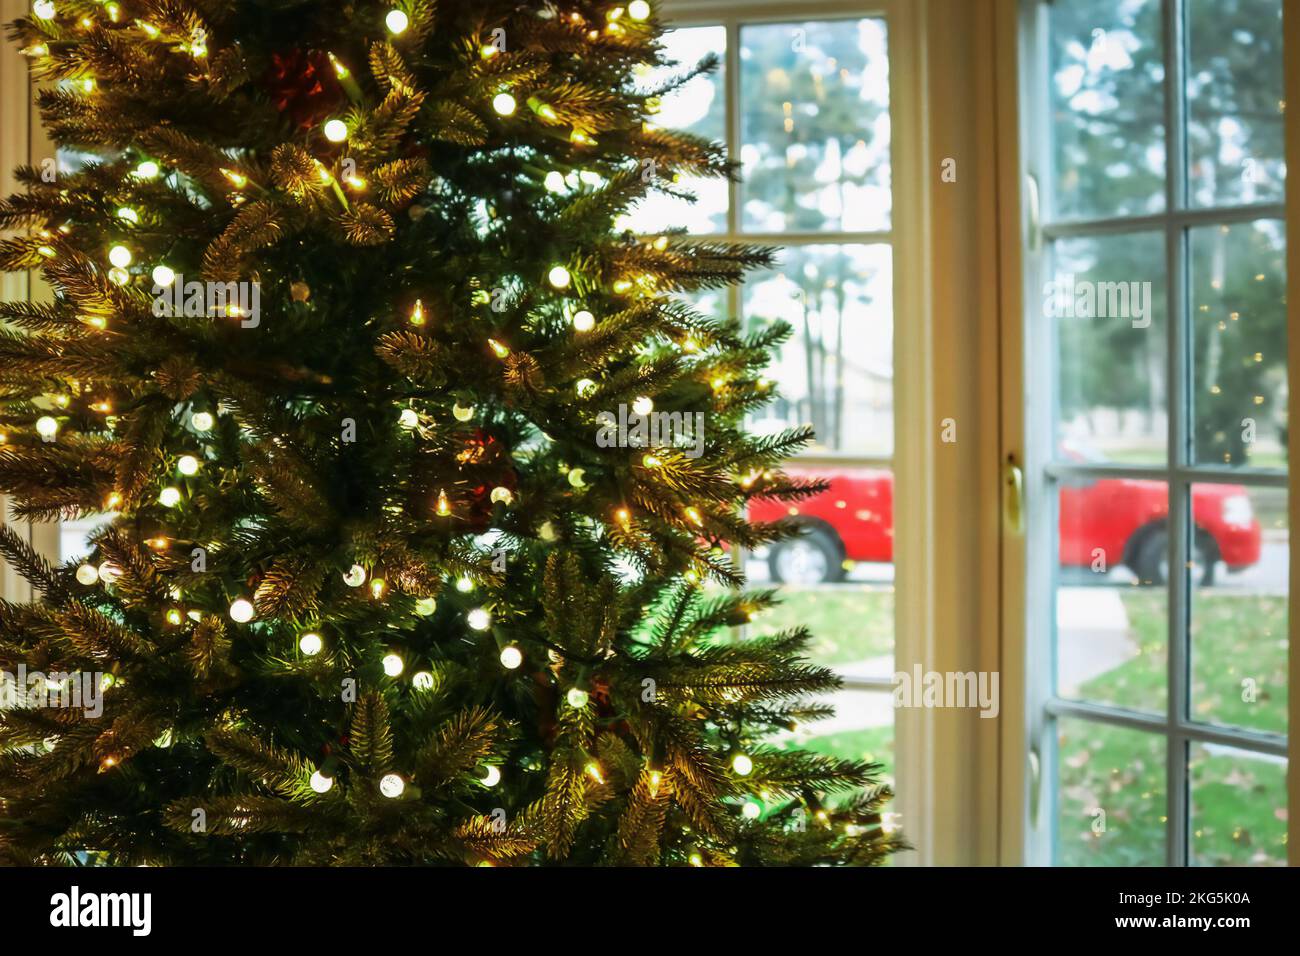 Christmas in the South - Christmas tree with lights in front of a blurred bay window showing green grass and trees and a red pickup truck Stock Photo